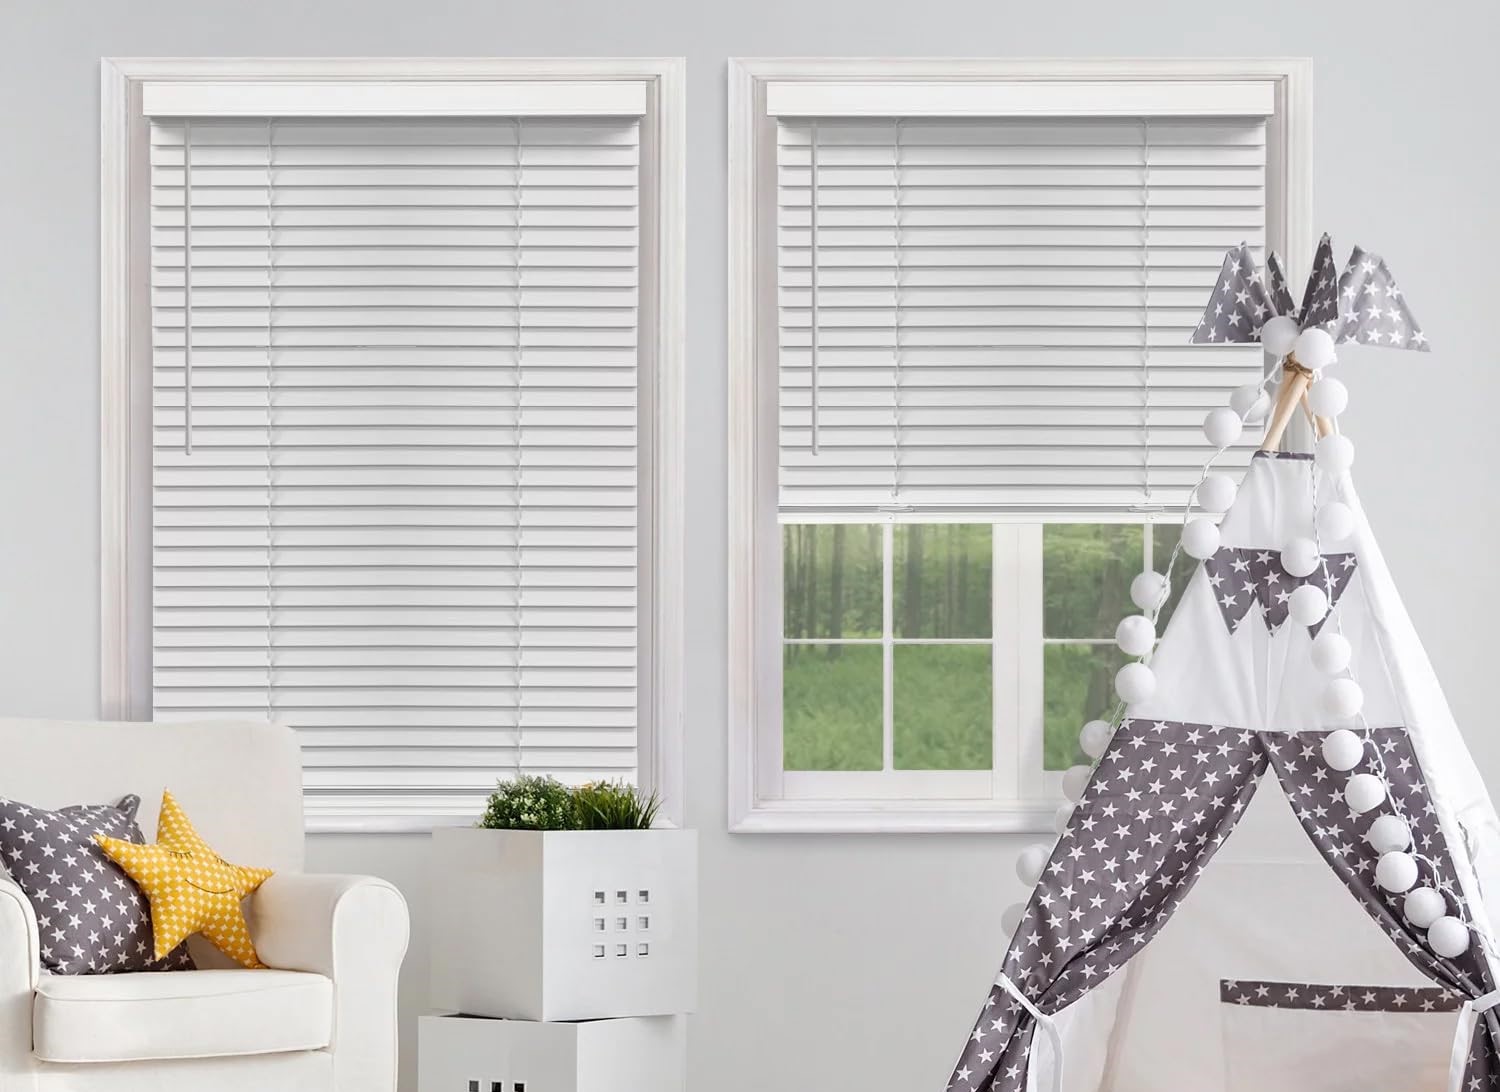 How To Measure Windows For Mini Blinds